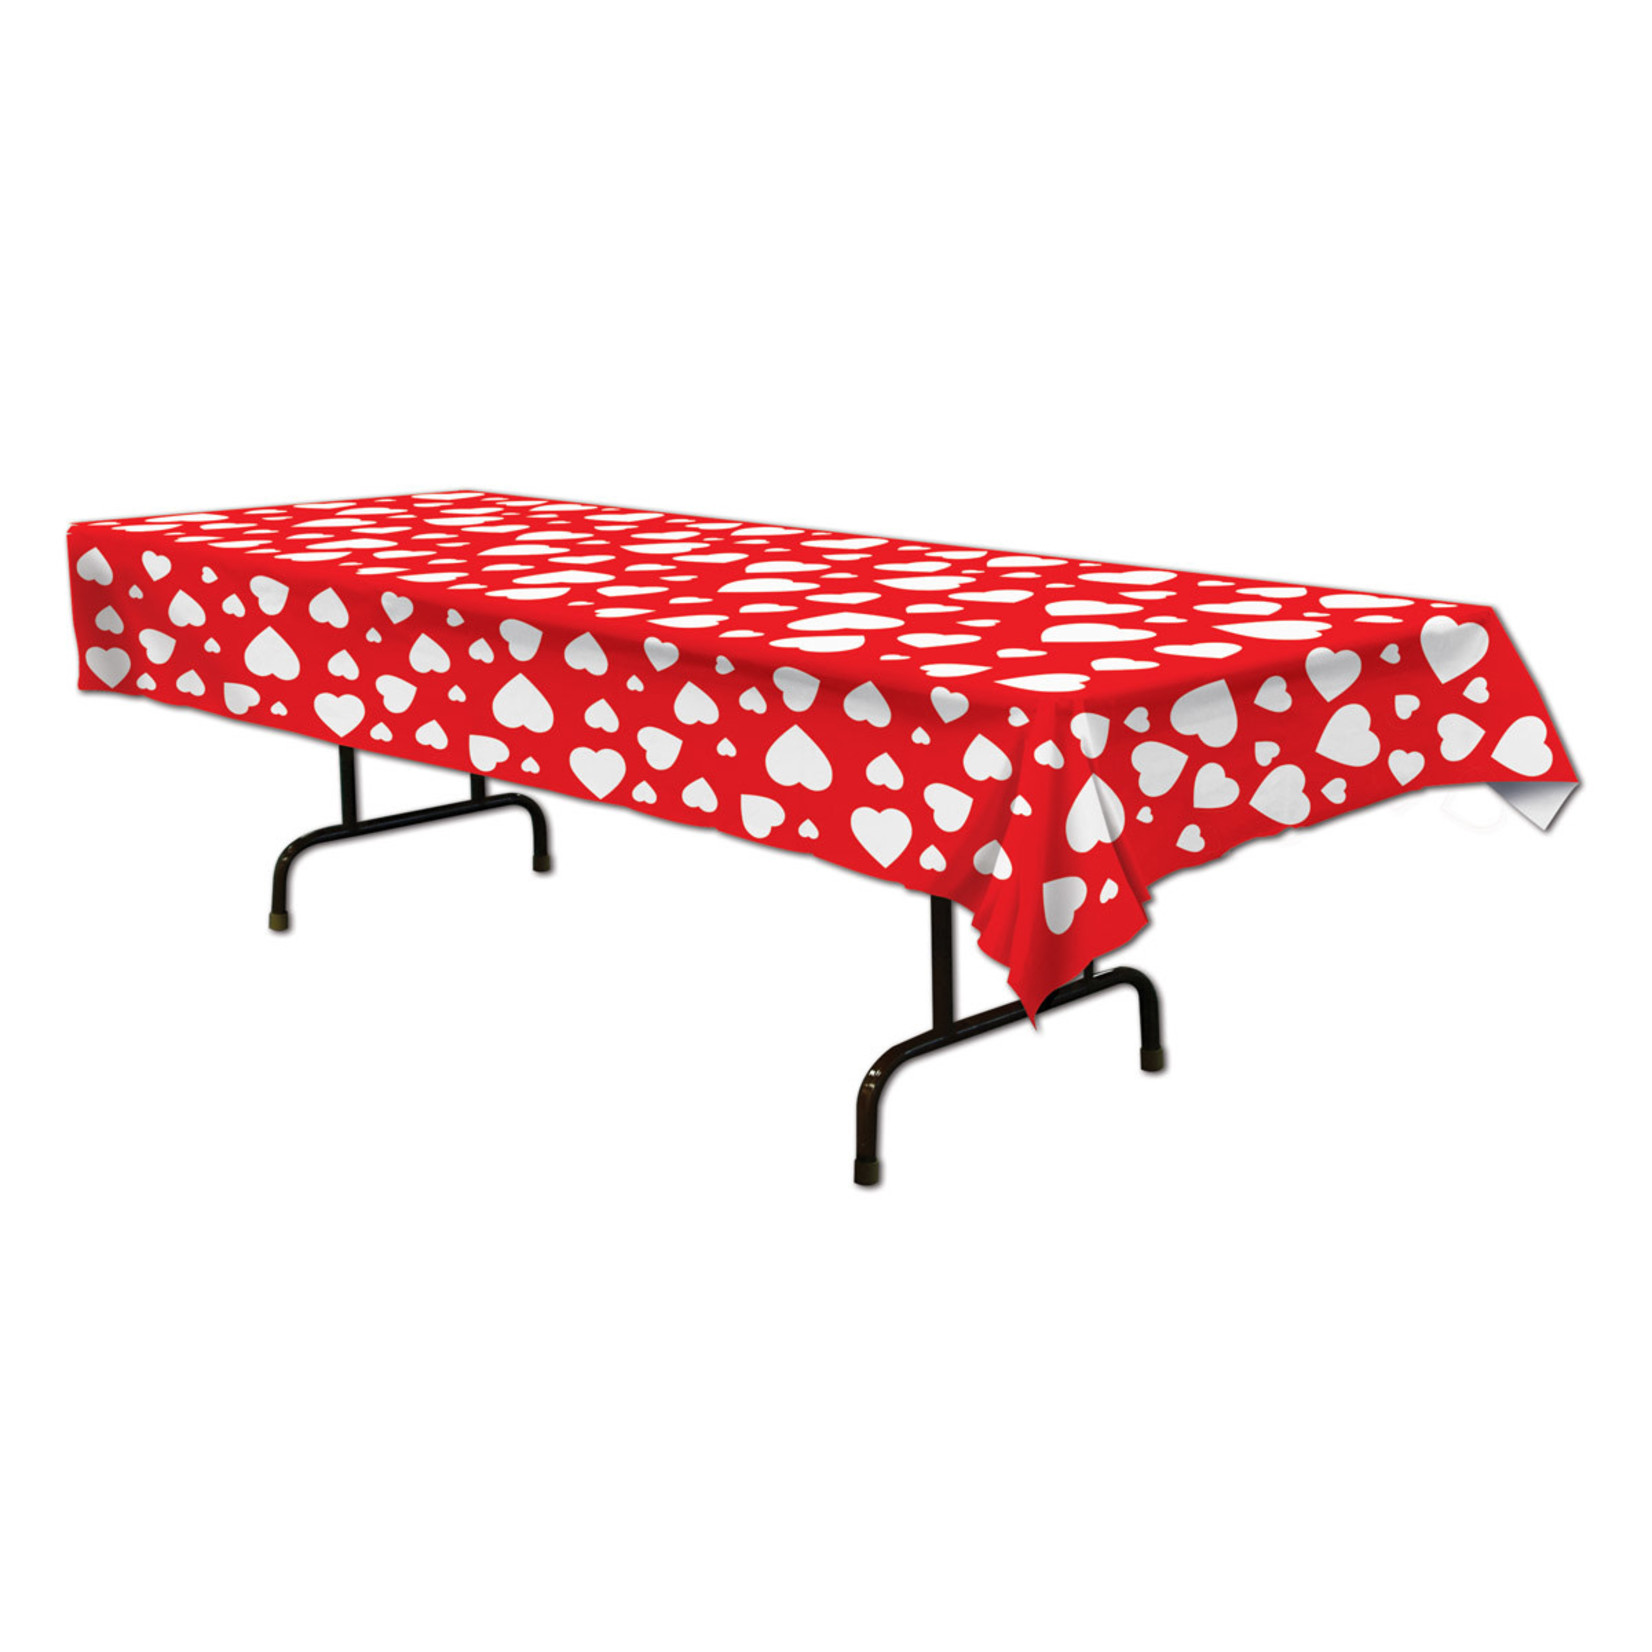 Beistle Red & White Hearts Plastic Table Cover - 54" x 108"